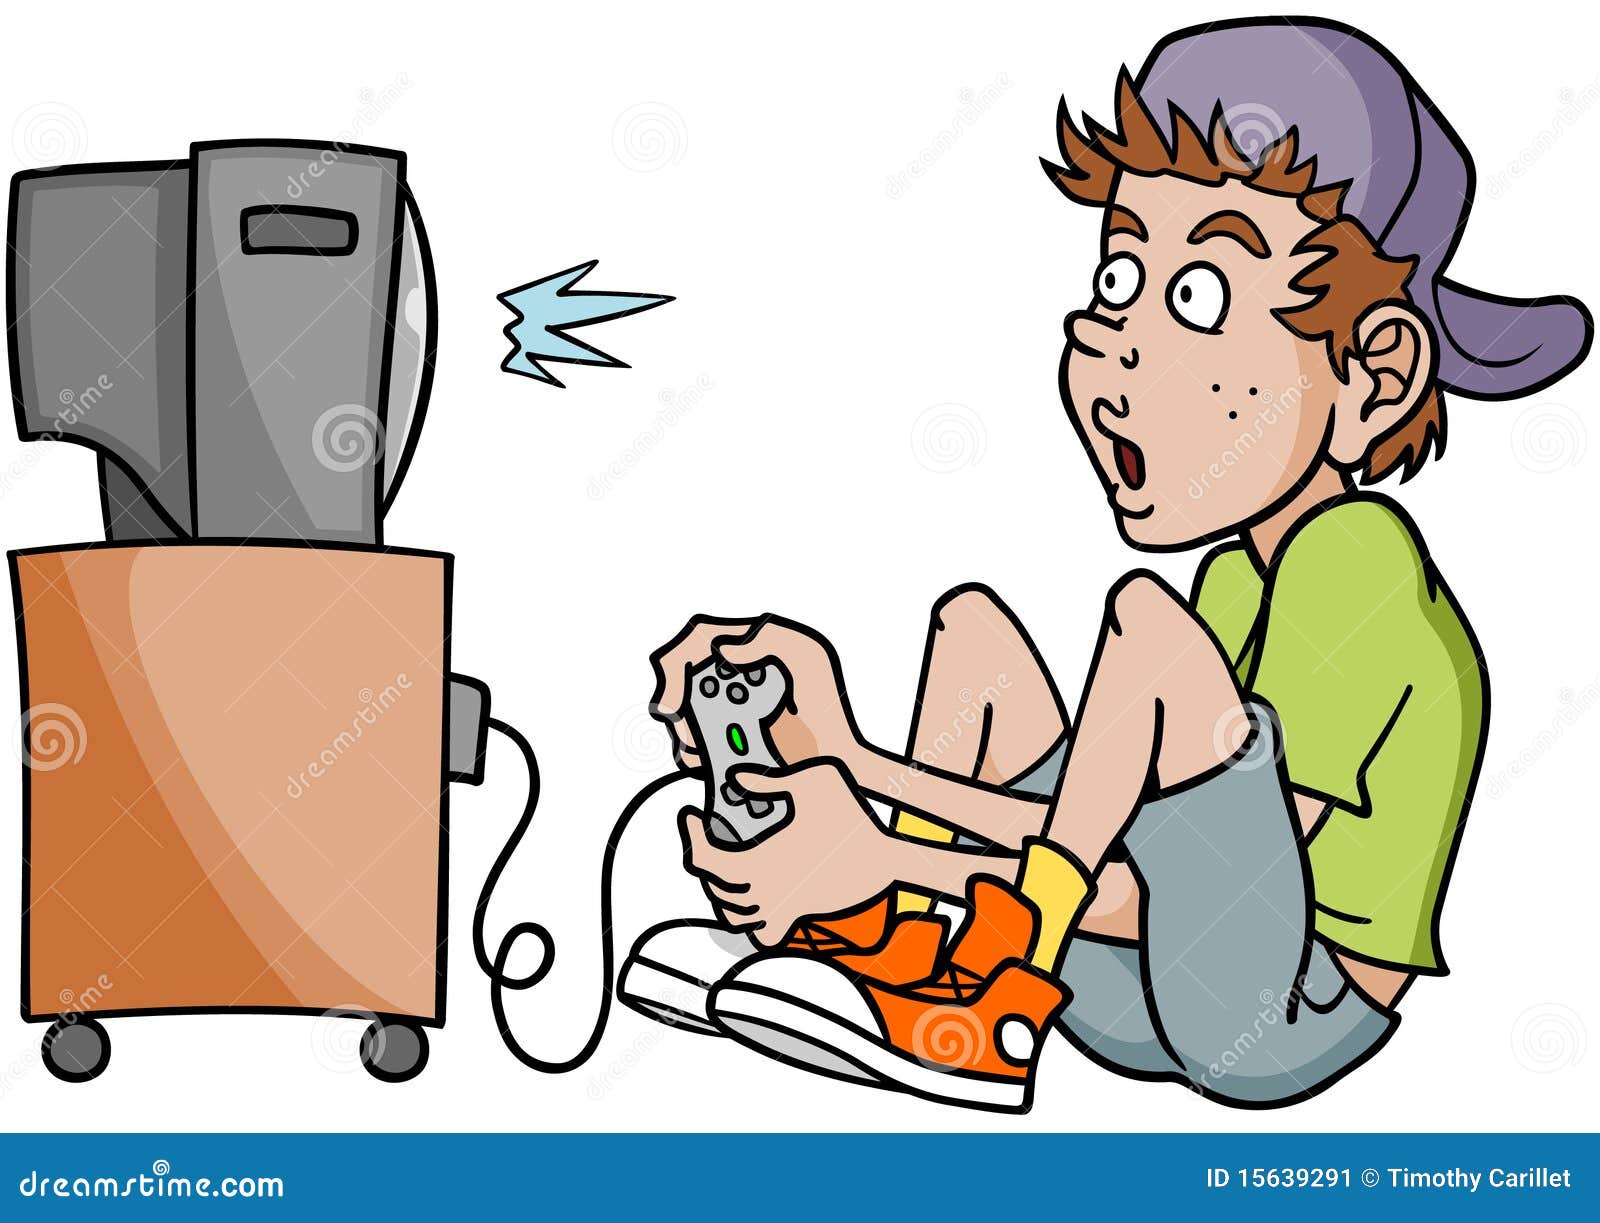 person playing video games clipart - photo #3